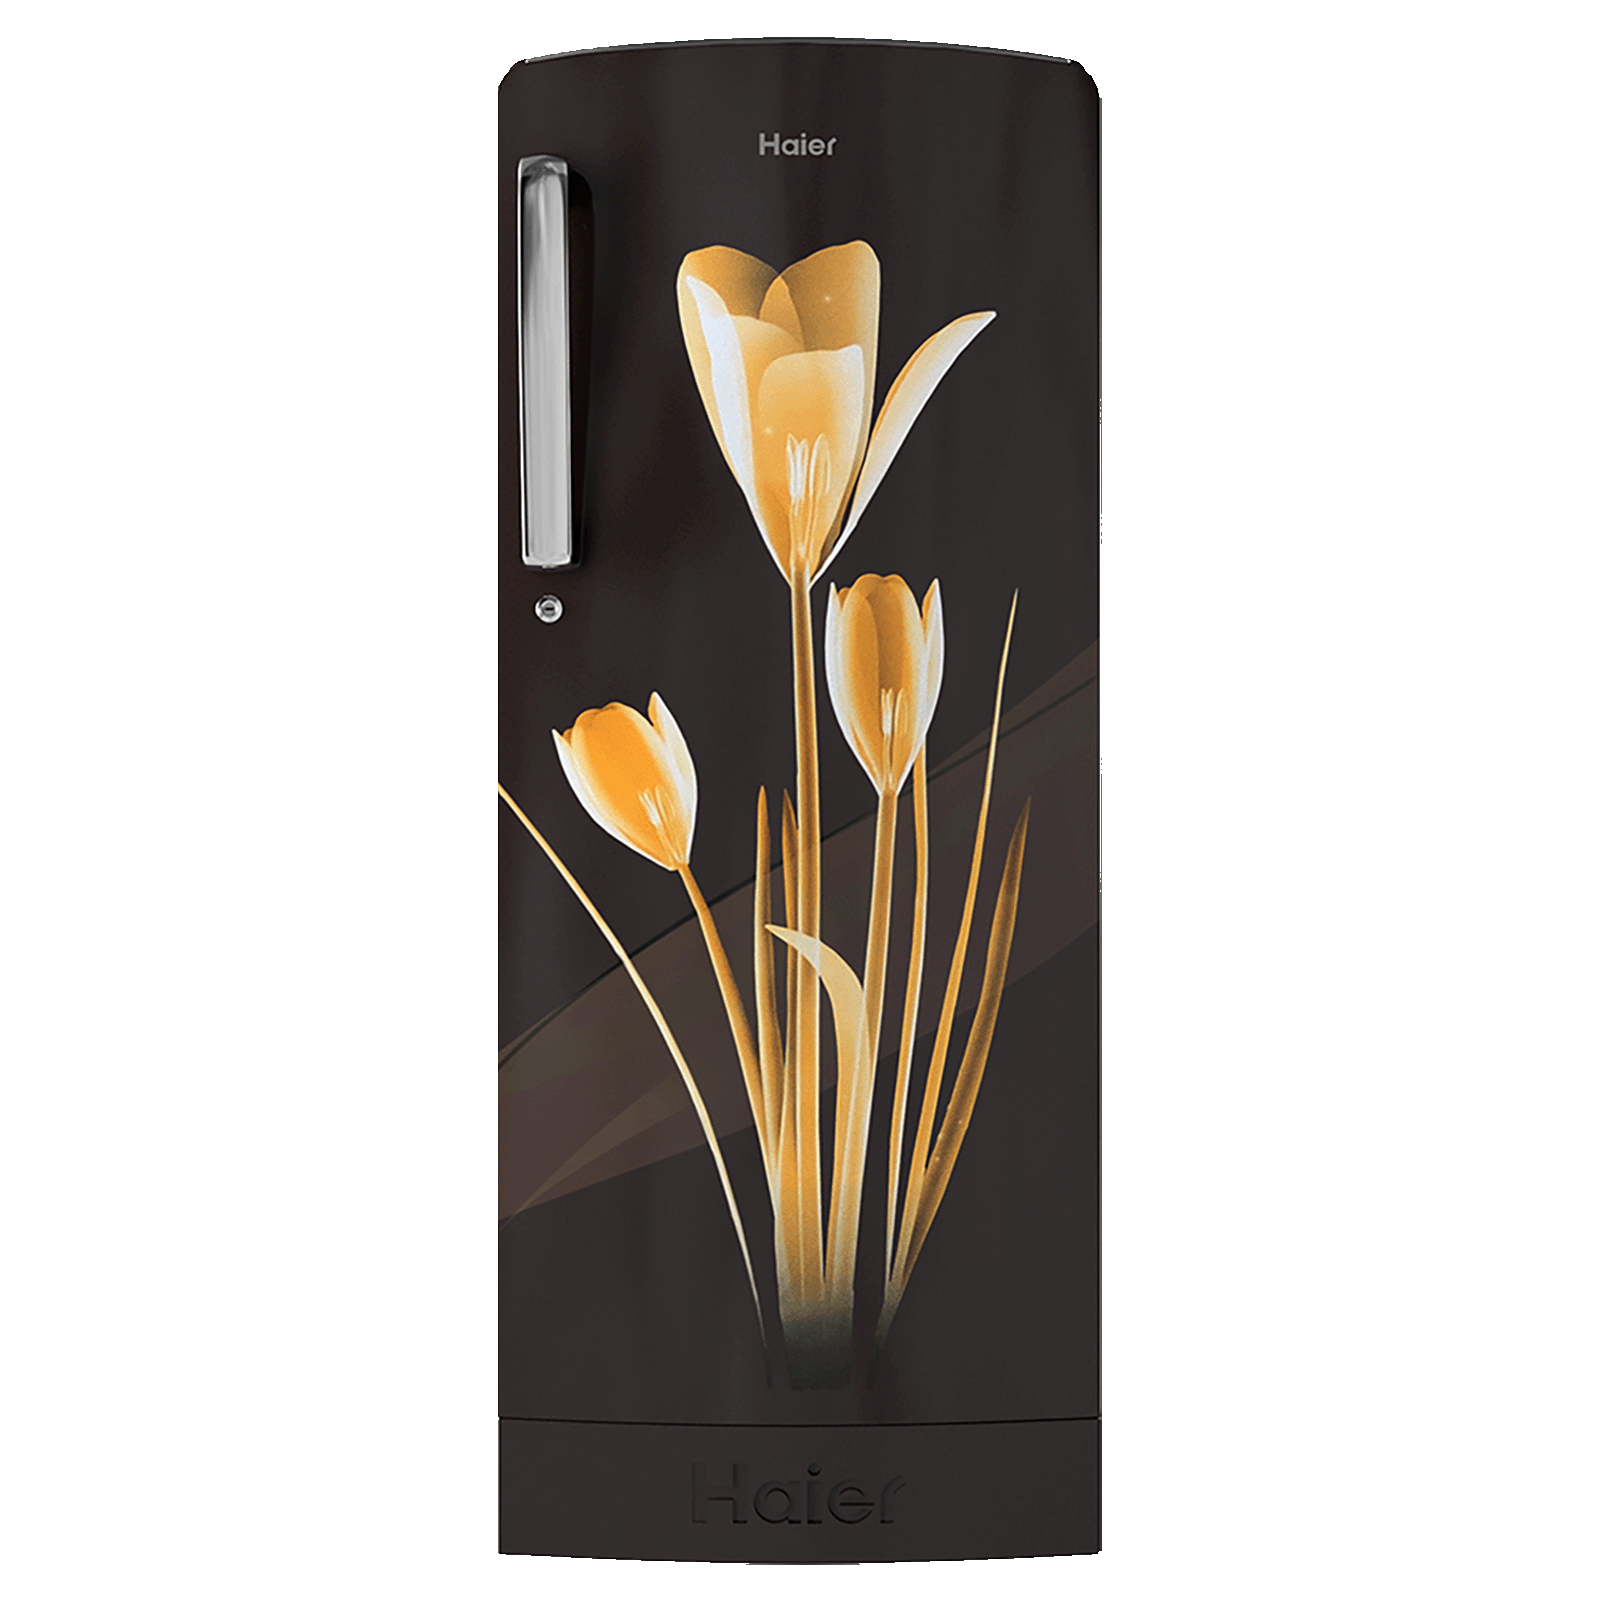 Haier - Haier 192 Litres 3 Star Direct Cool Single Door Refrigerator (With Base Drawer, HRD- 1923PKL-E, Black Lily)